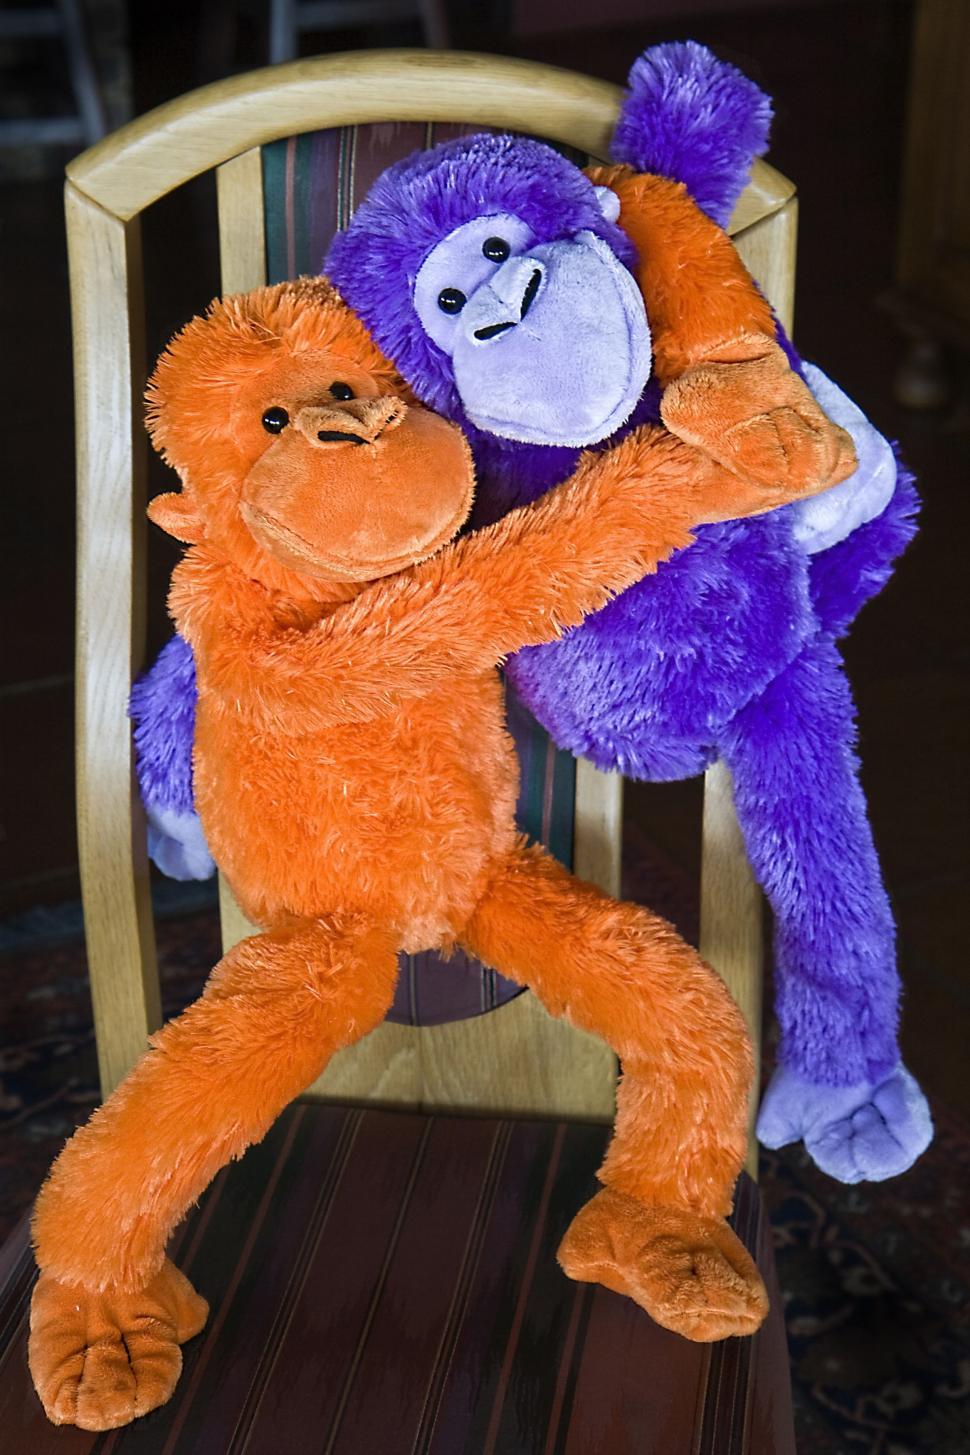 Free Image of Two Stuffed Monkeys Sitting on Chair 